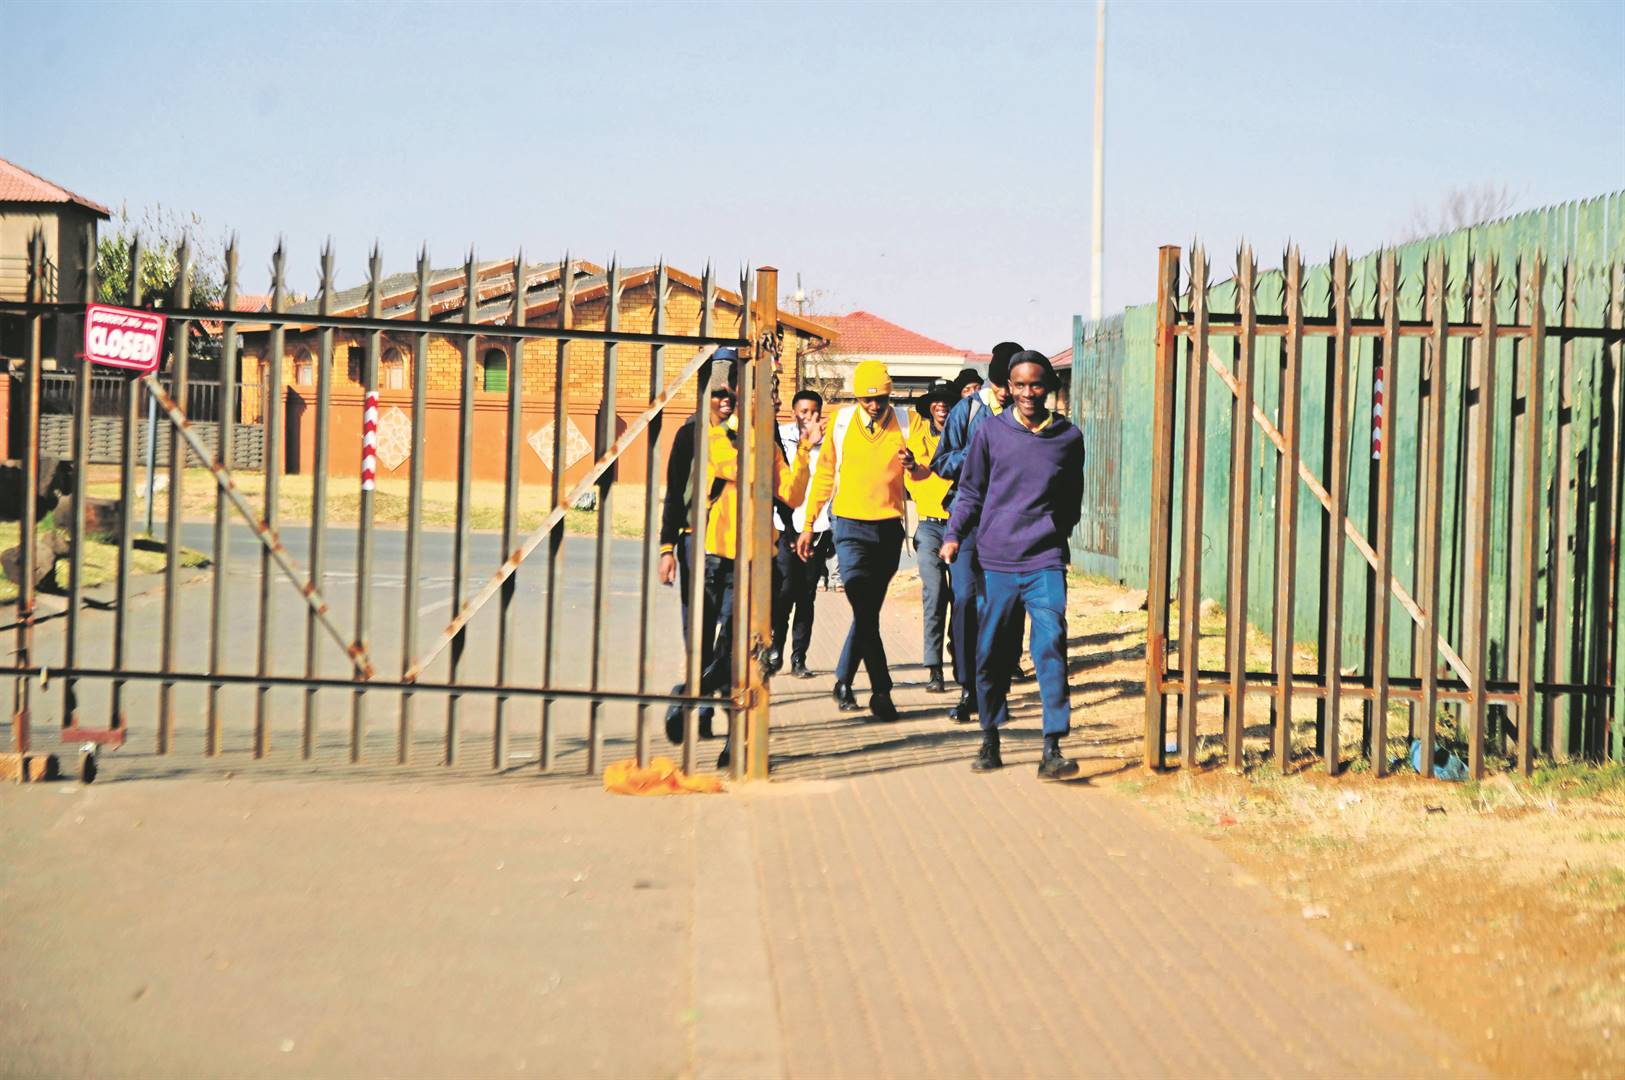 News24 | Vosloorus residents combat rising crime as fear limits daily life